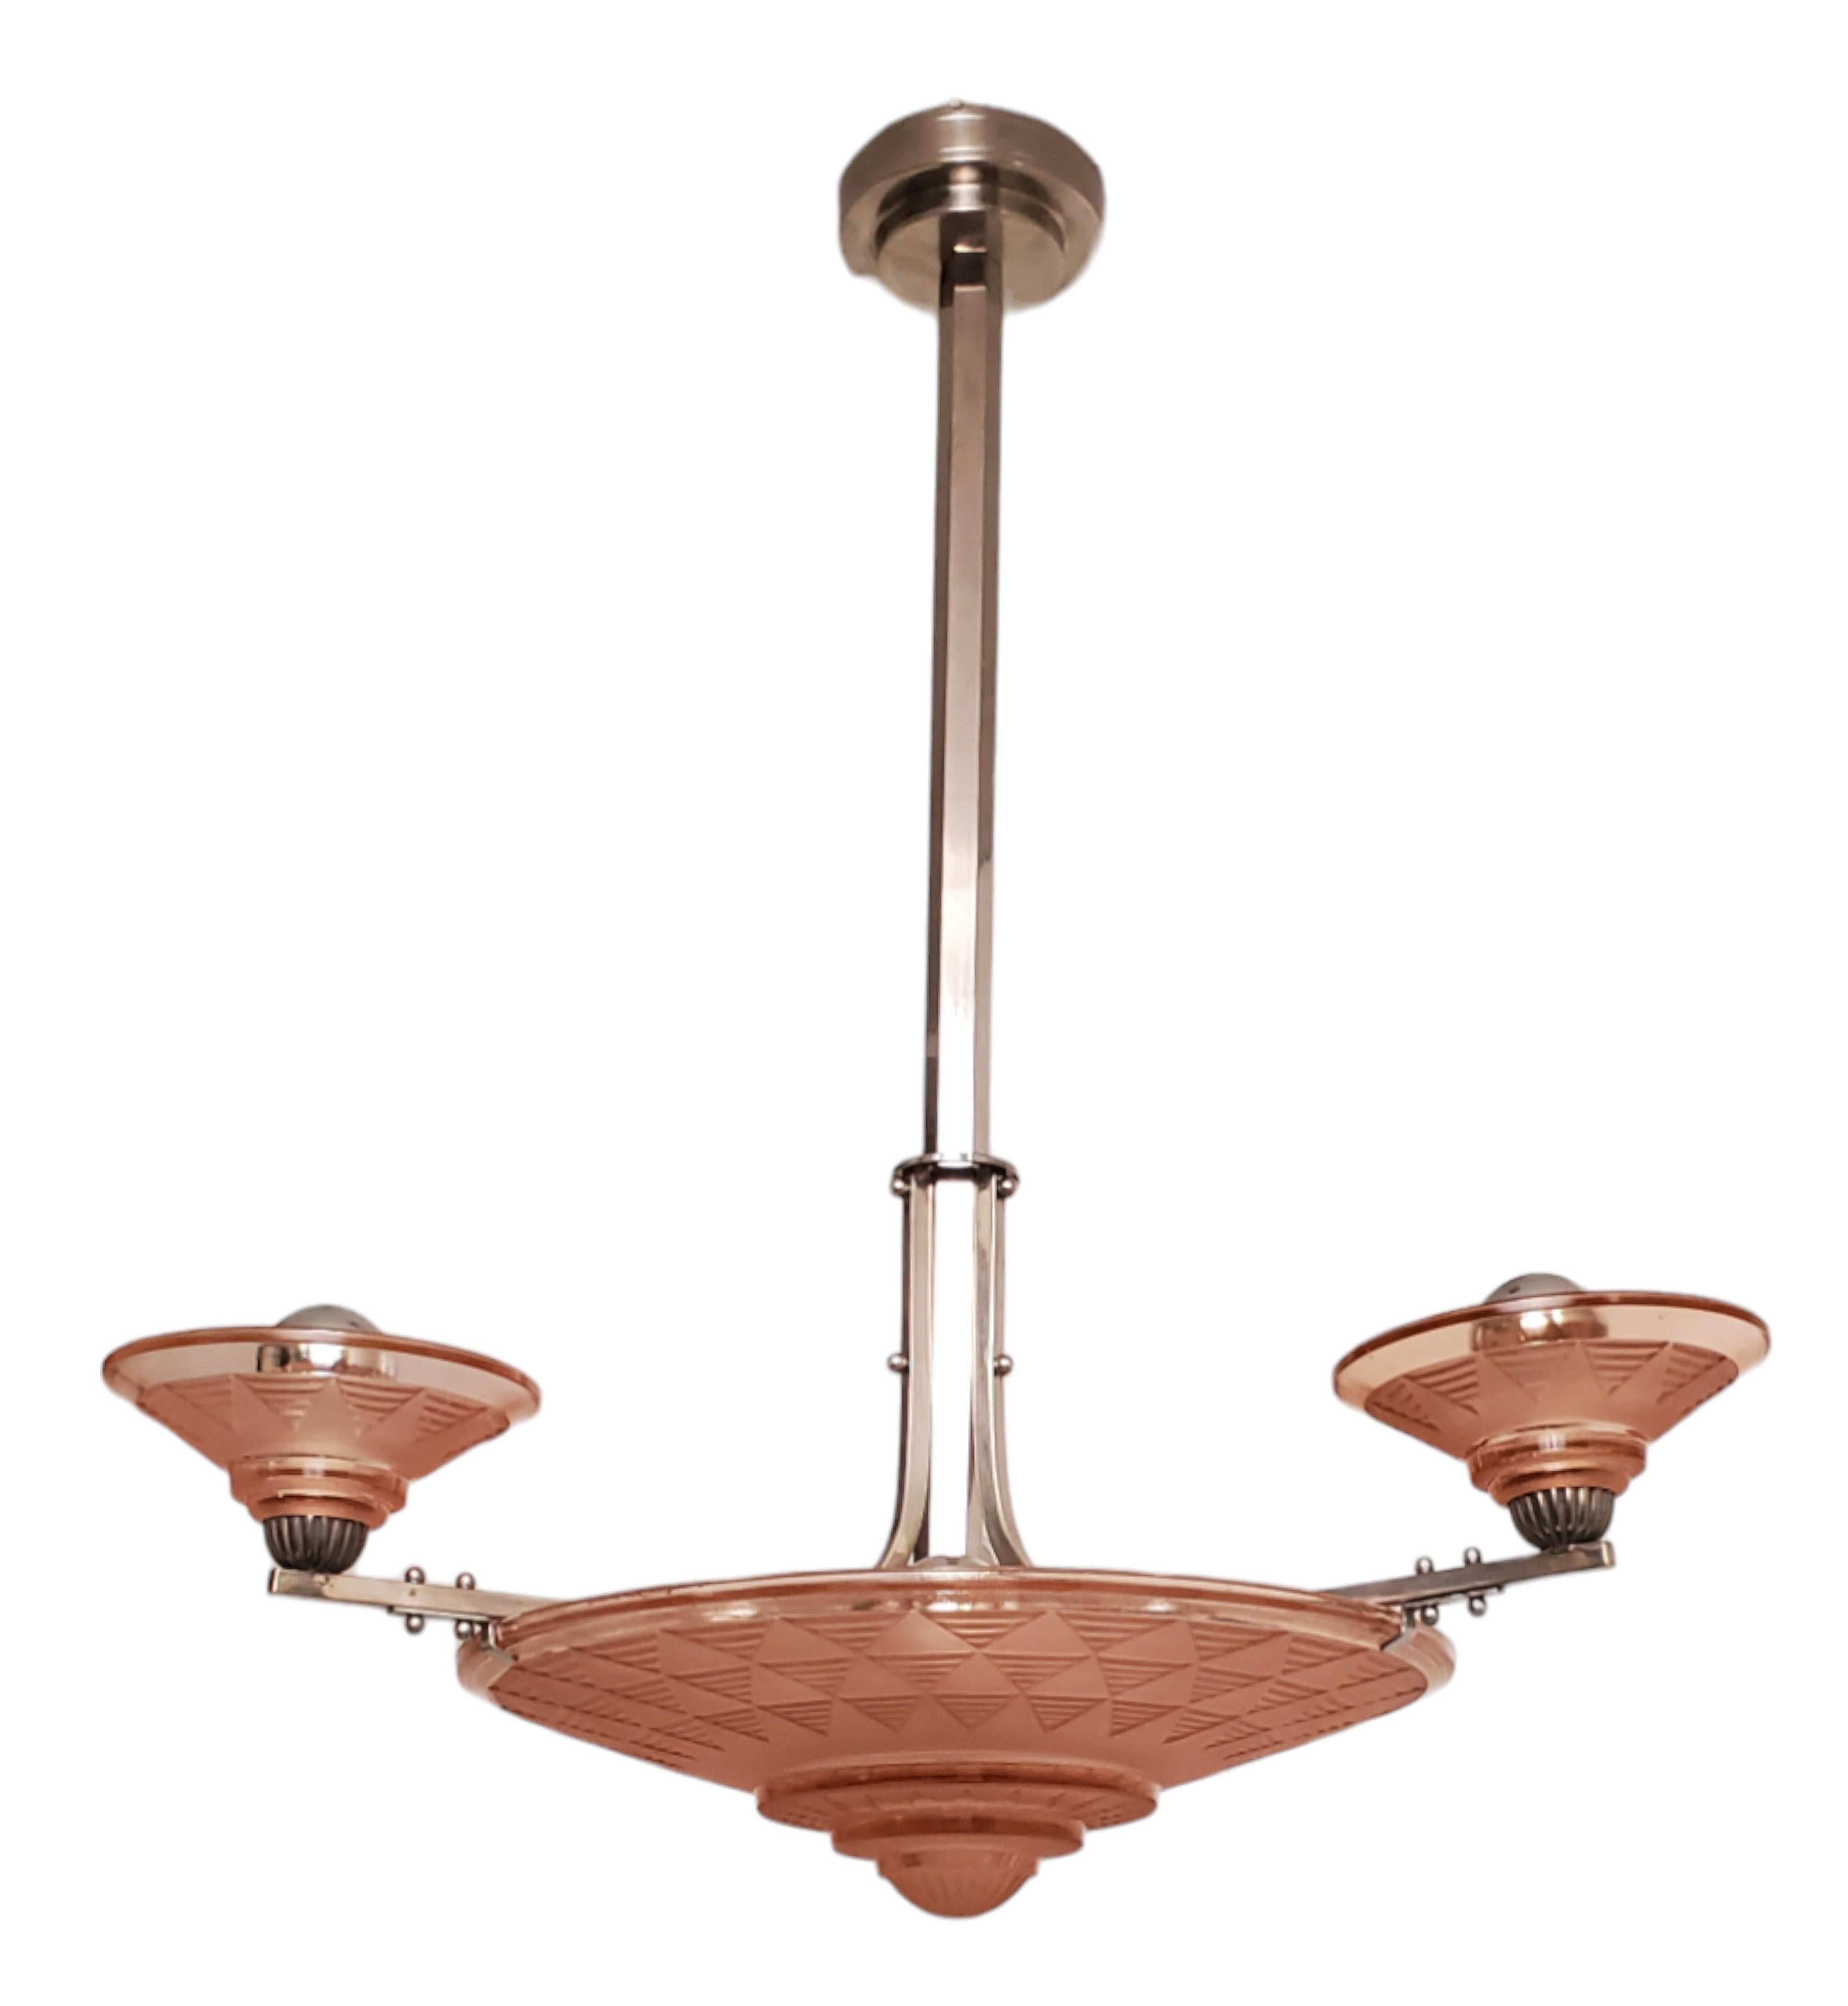 Petitot Art Deco peach /salmon /pink frosted glass + nickeled bronze chandelier For Sale 13